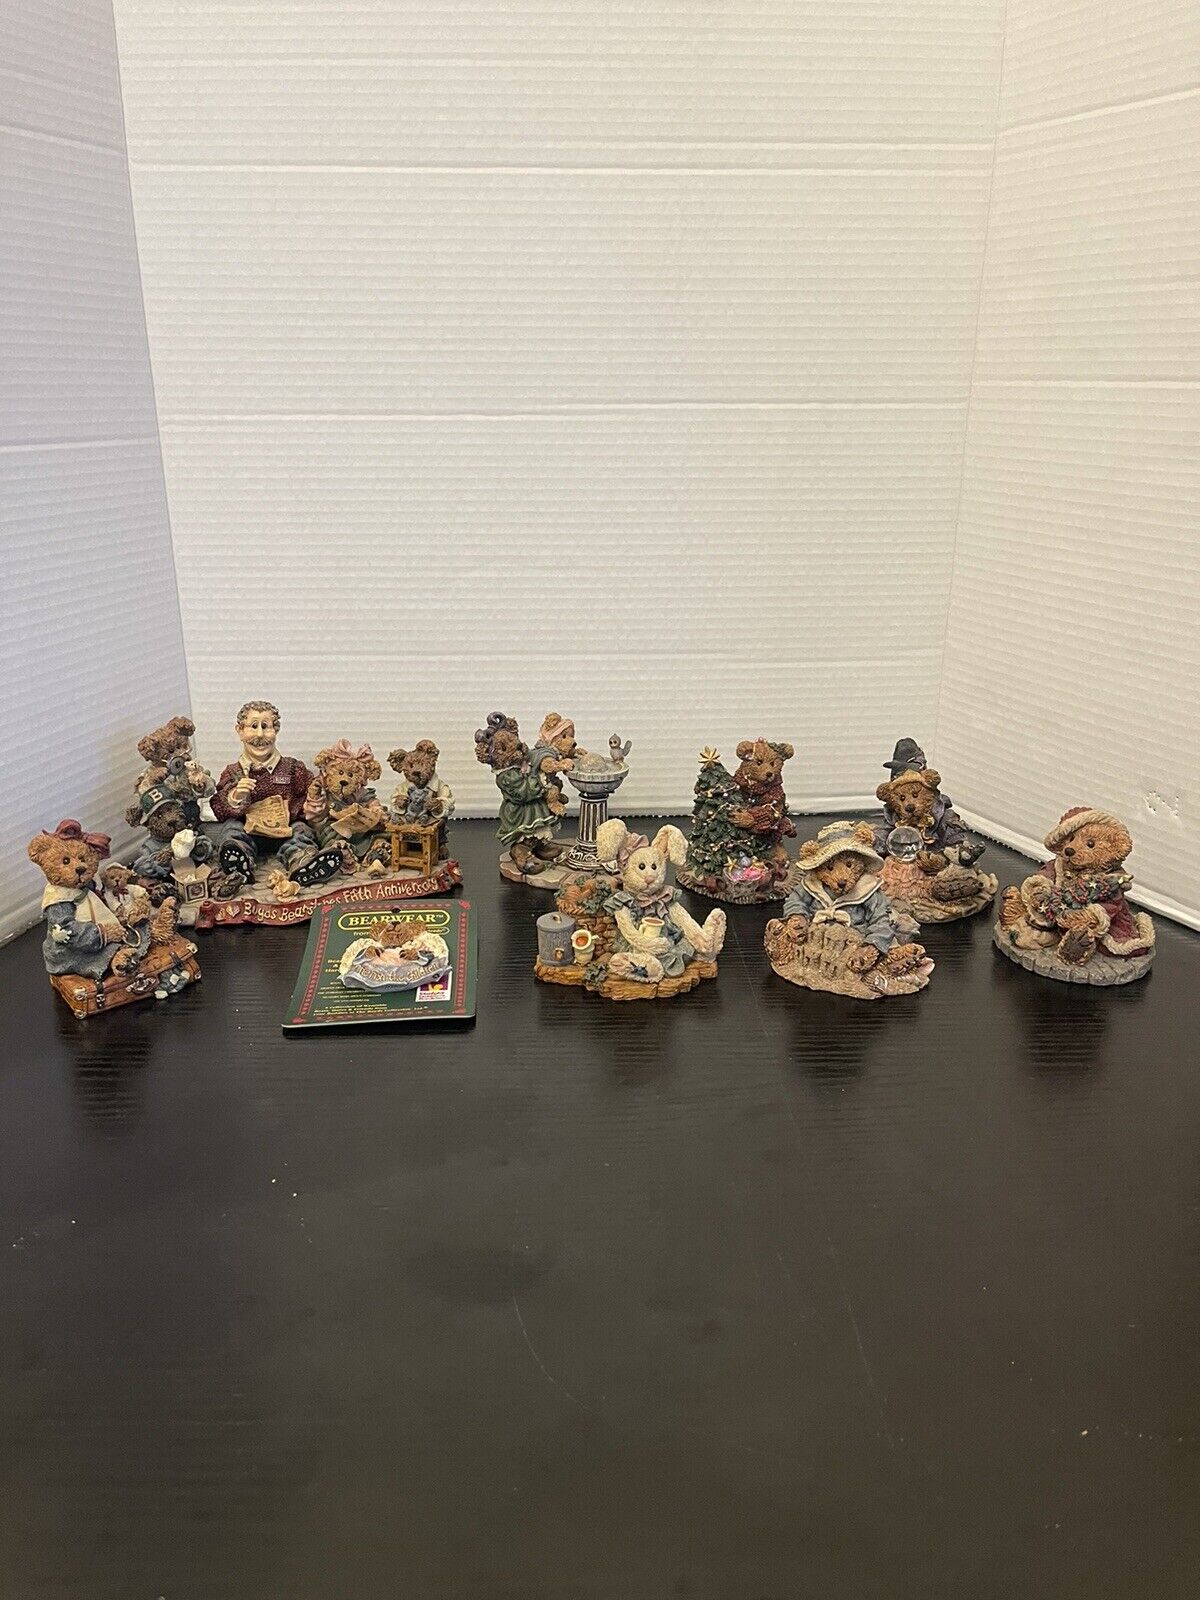 BOYD'S BEARS FIGURINES COLLECTION ALL VINTAGE LOT OF 8